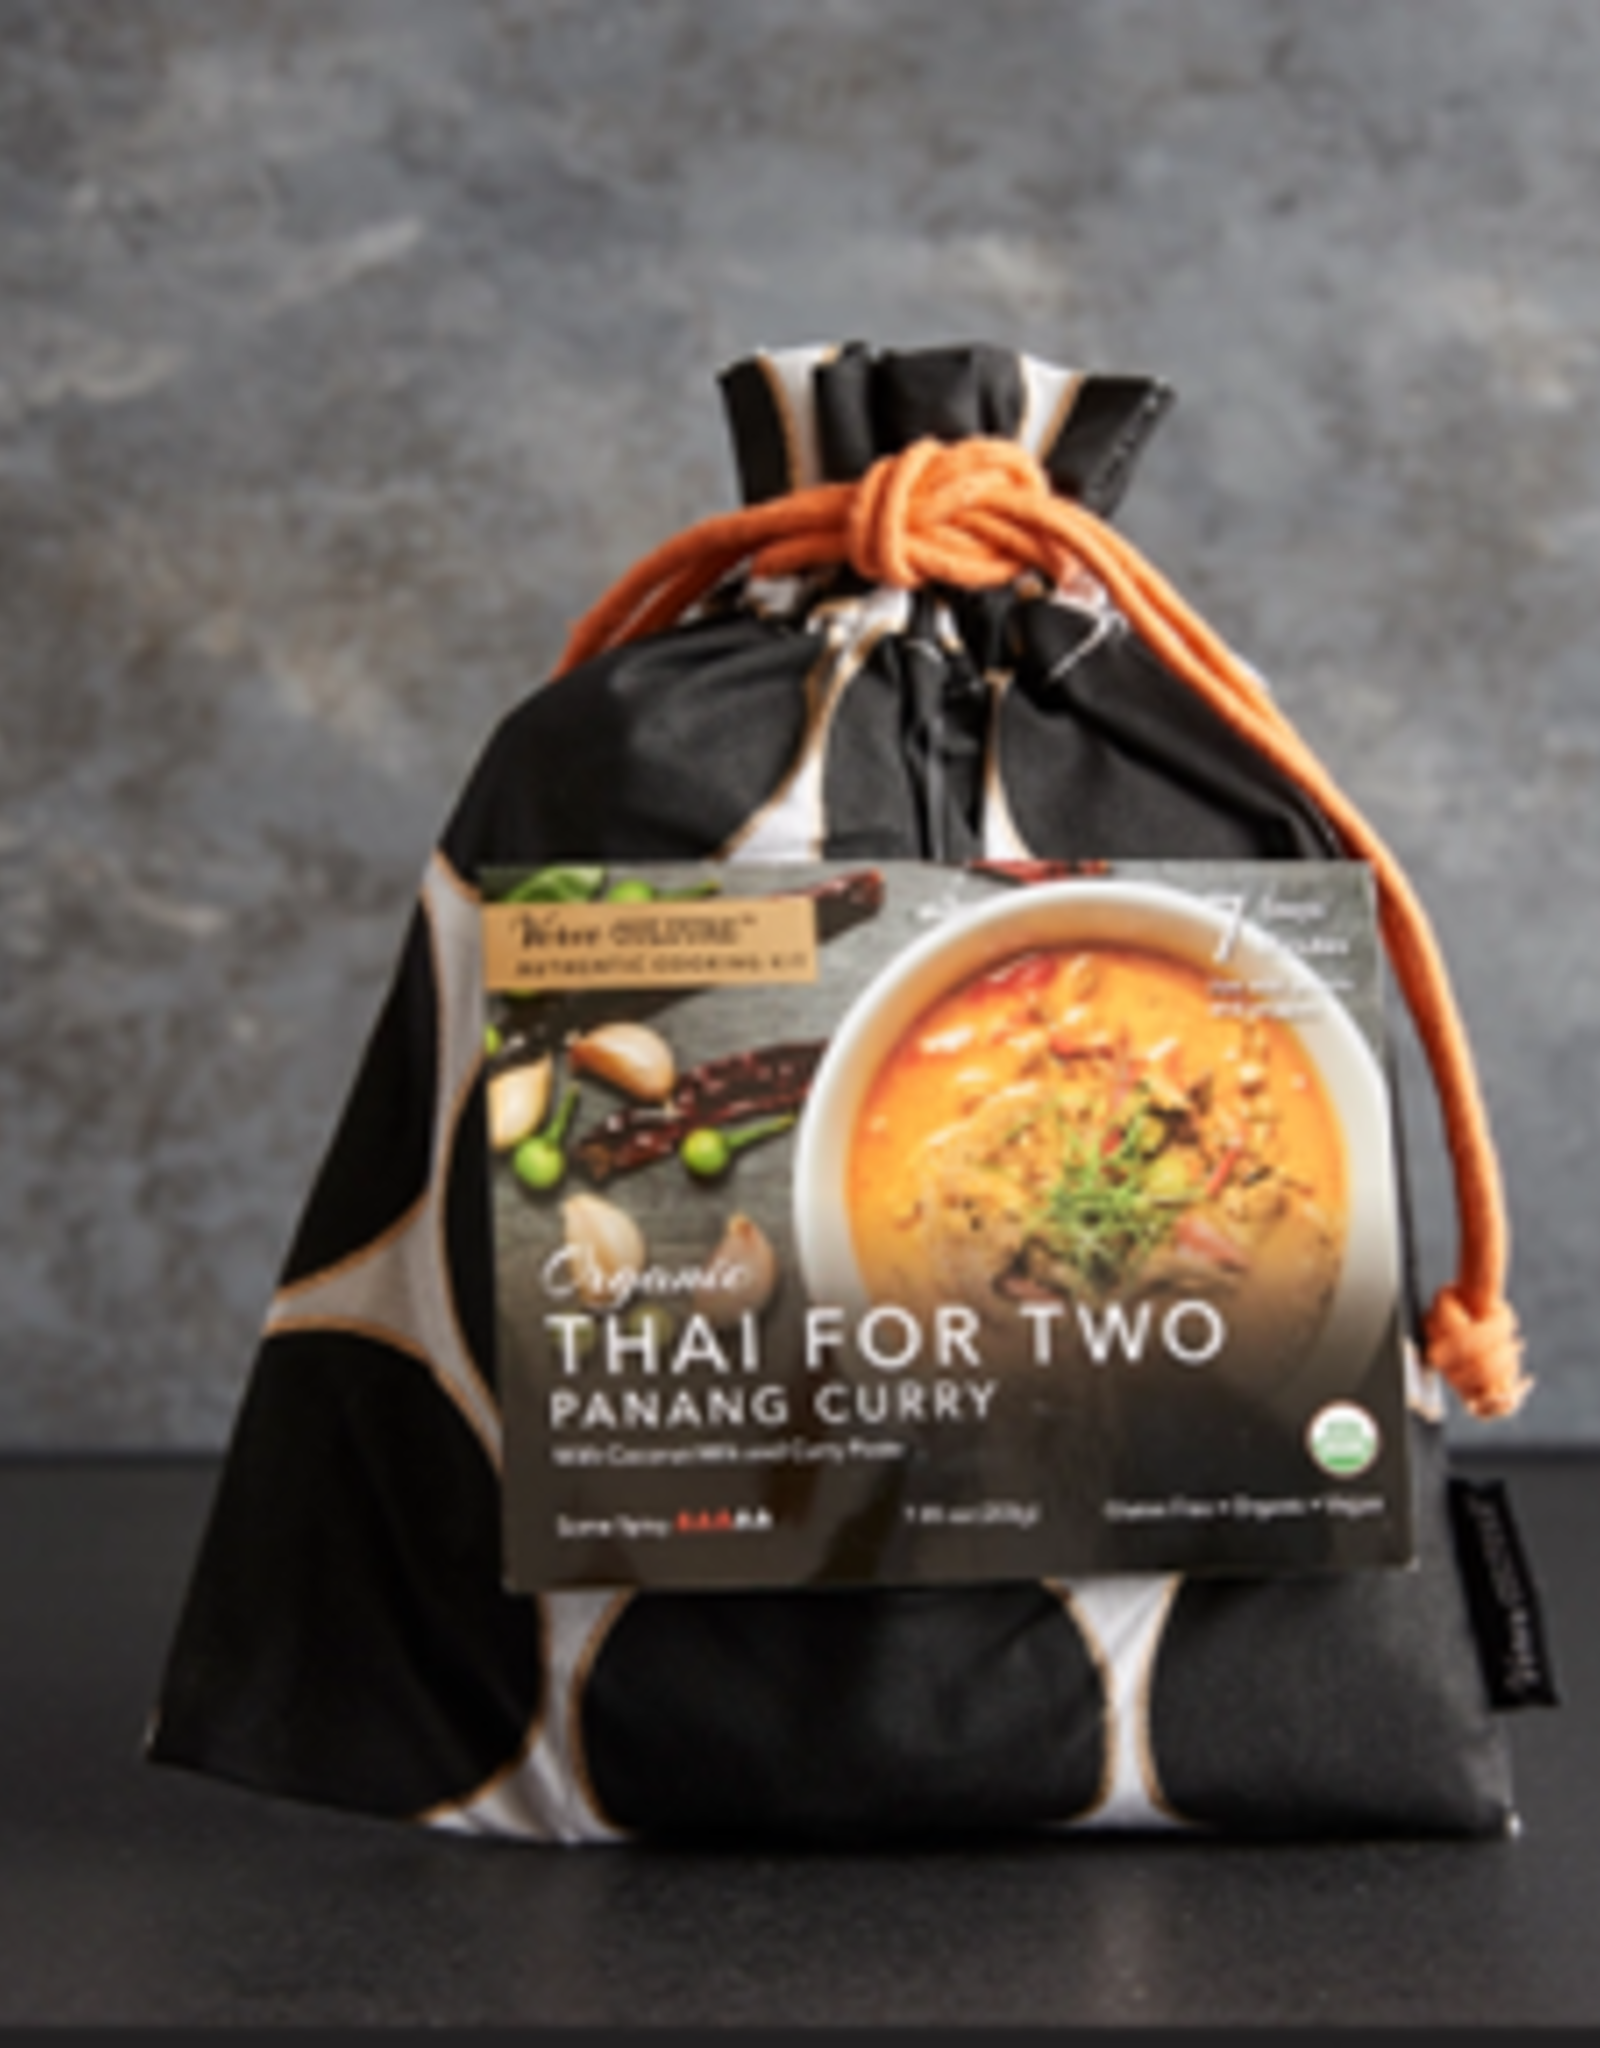 Verve Culture Thai Cooking Kit- Panang Curry